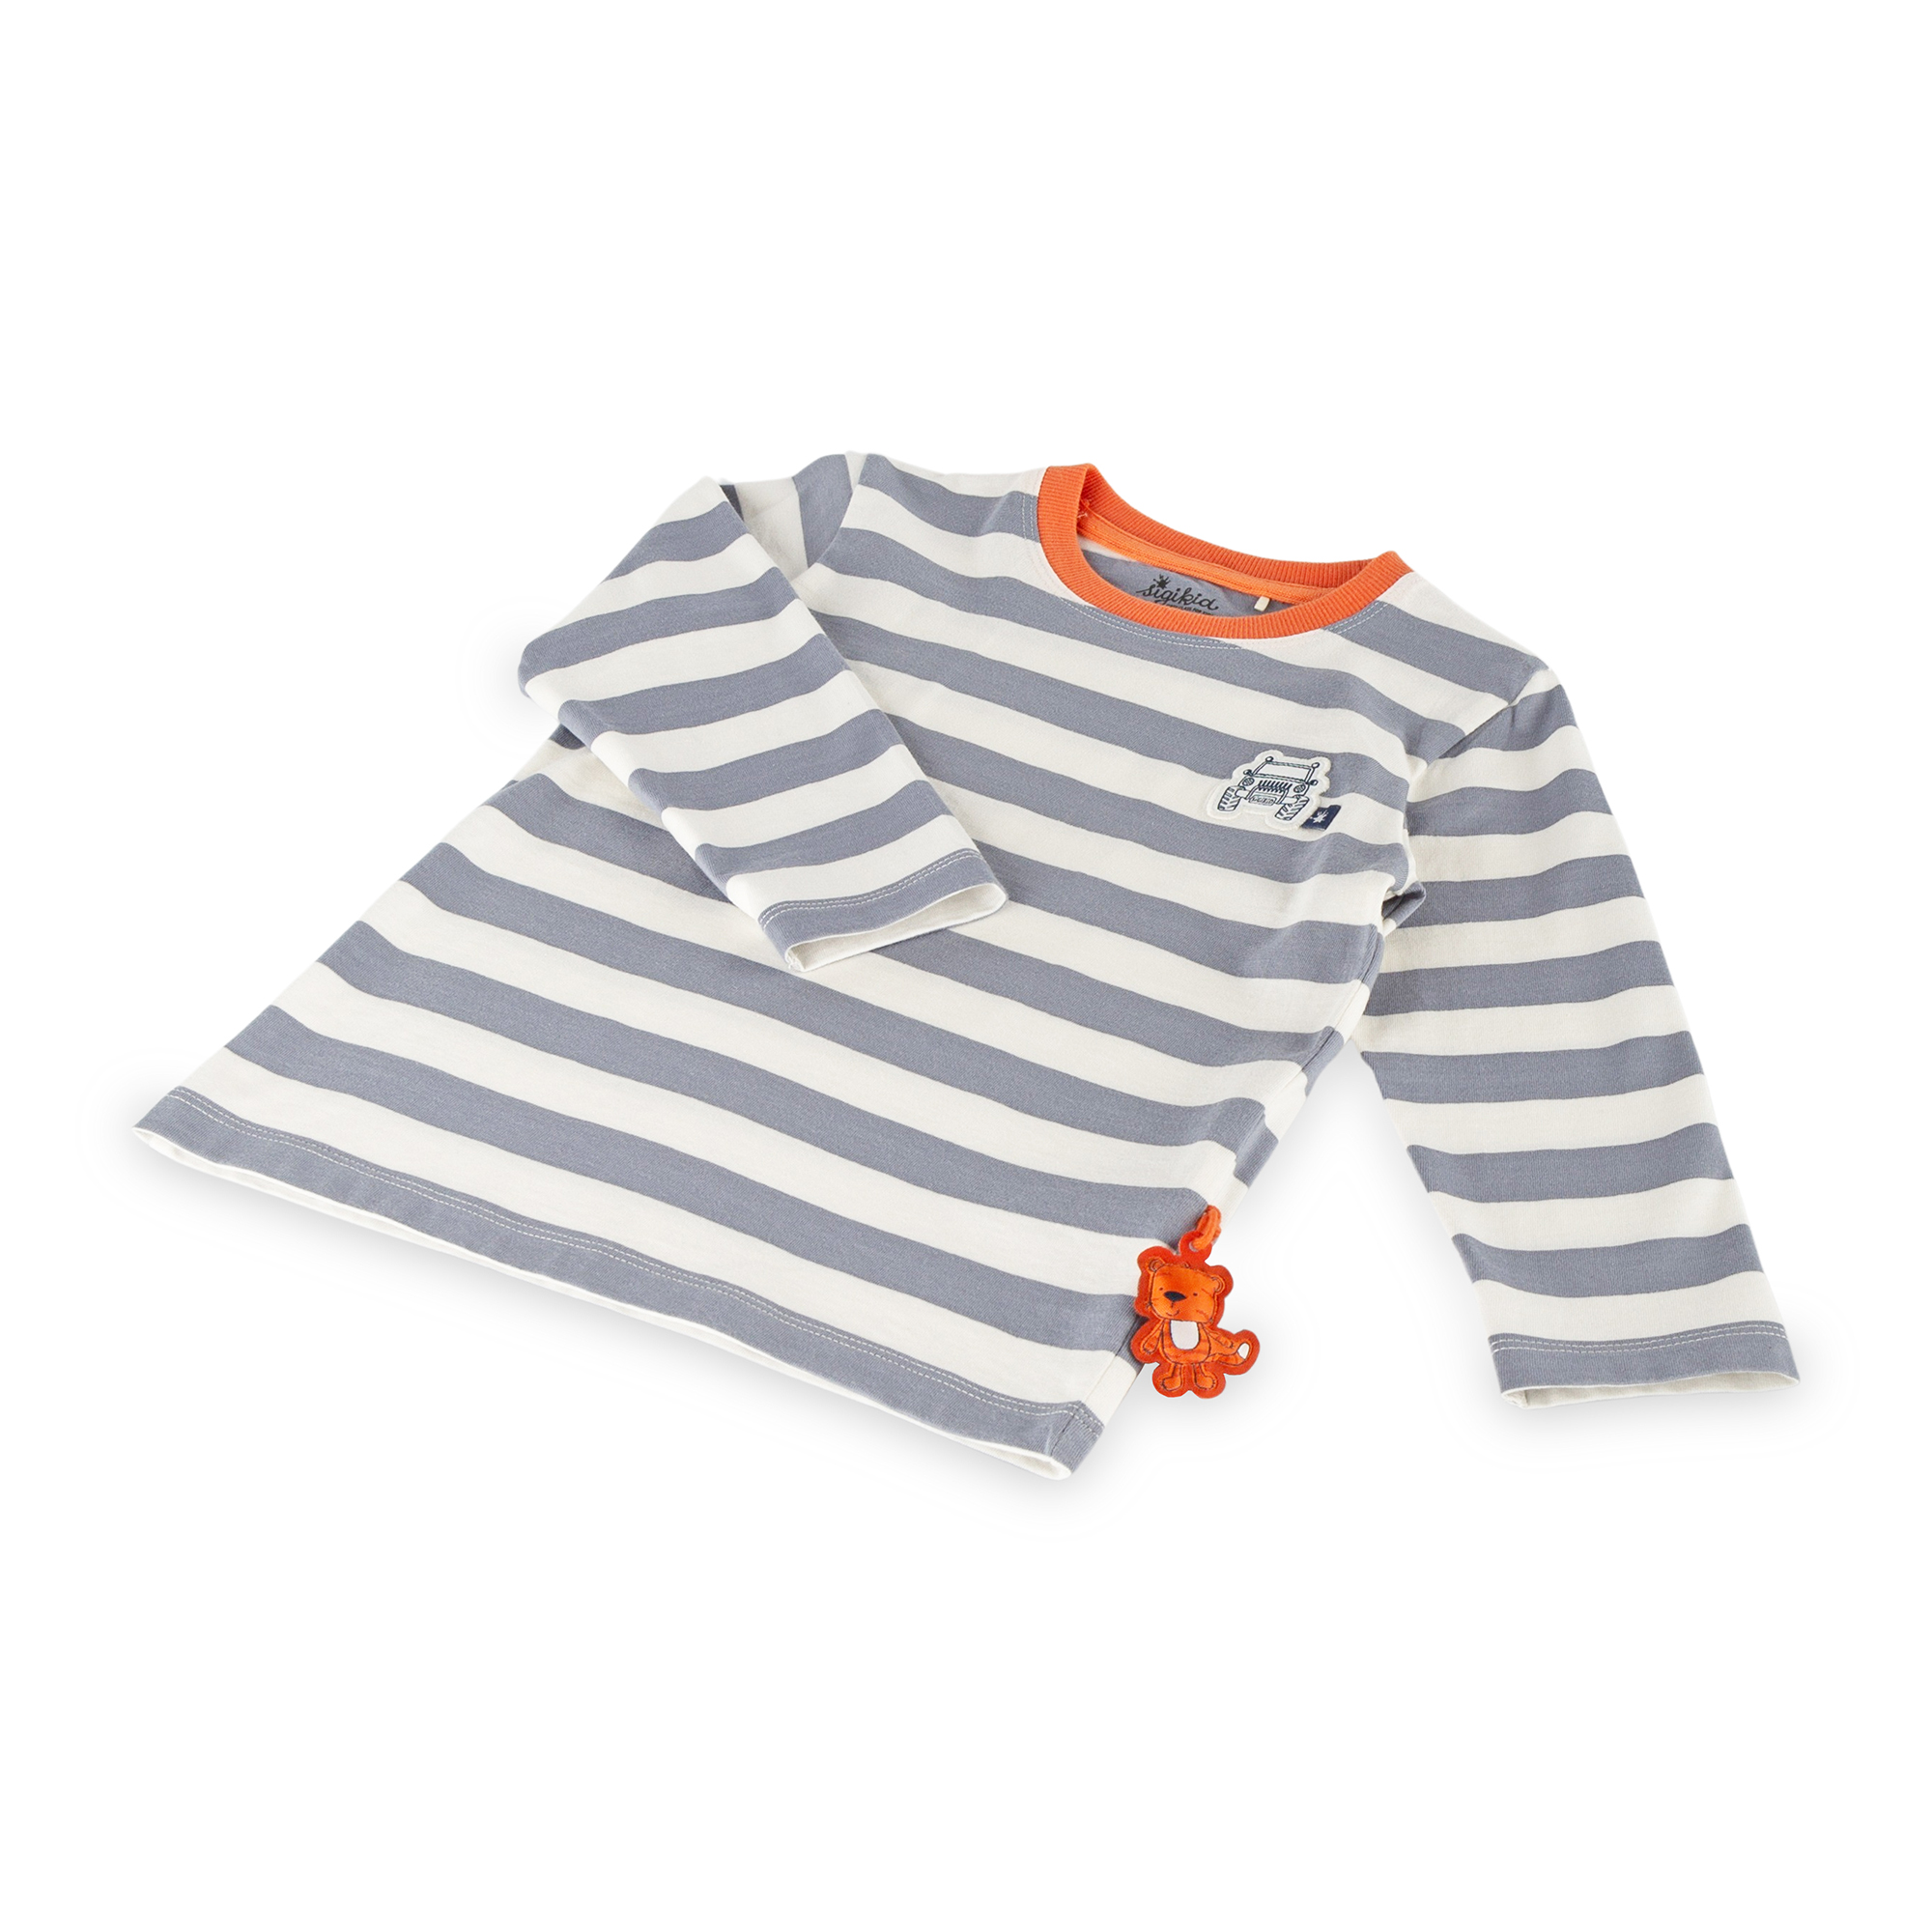 Striped children's long sleeve Tee jeep patch